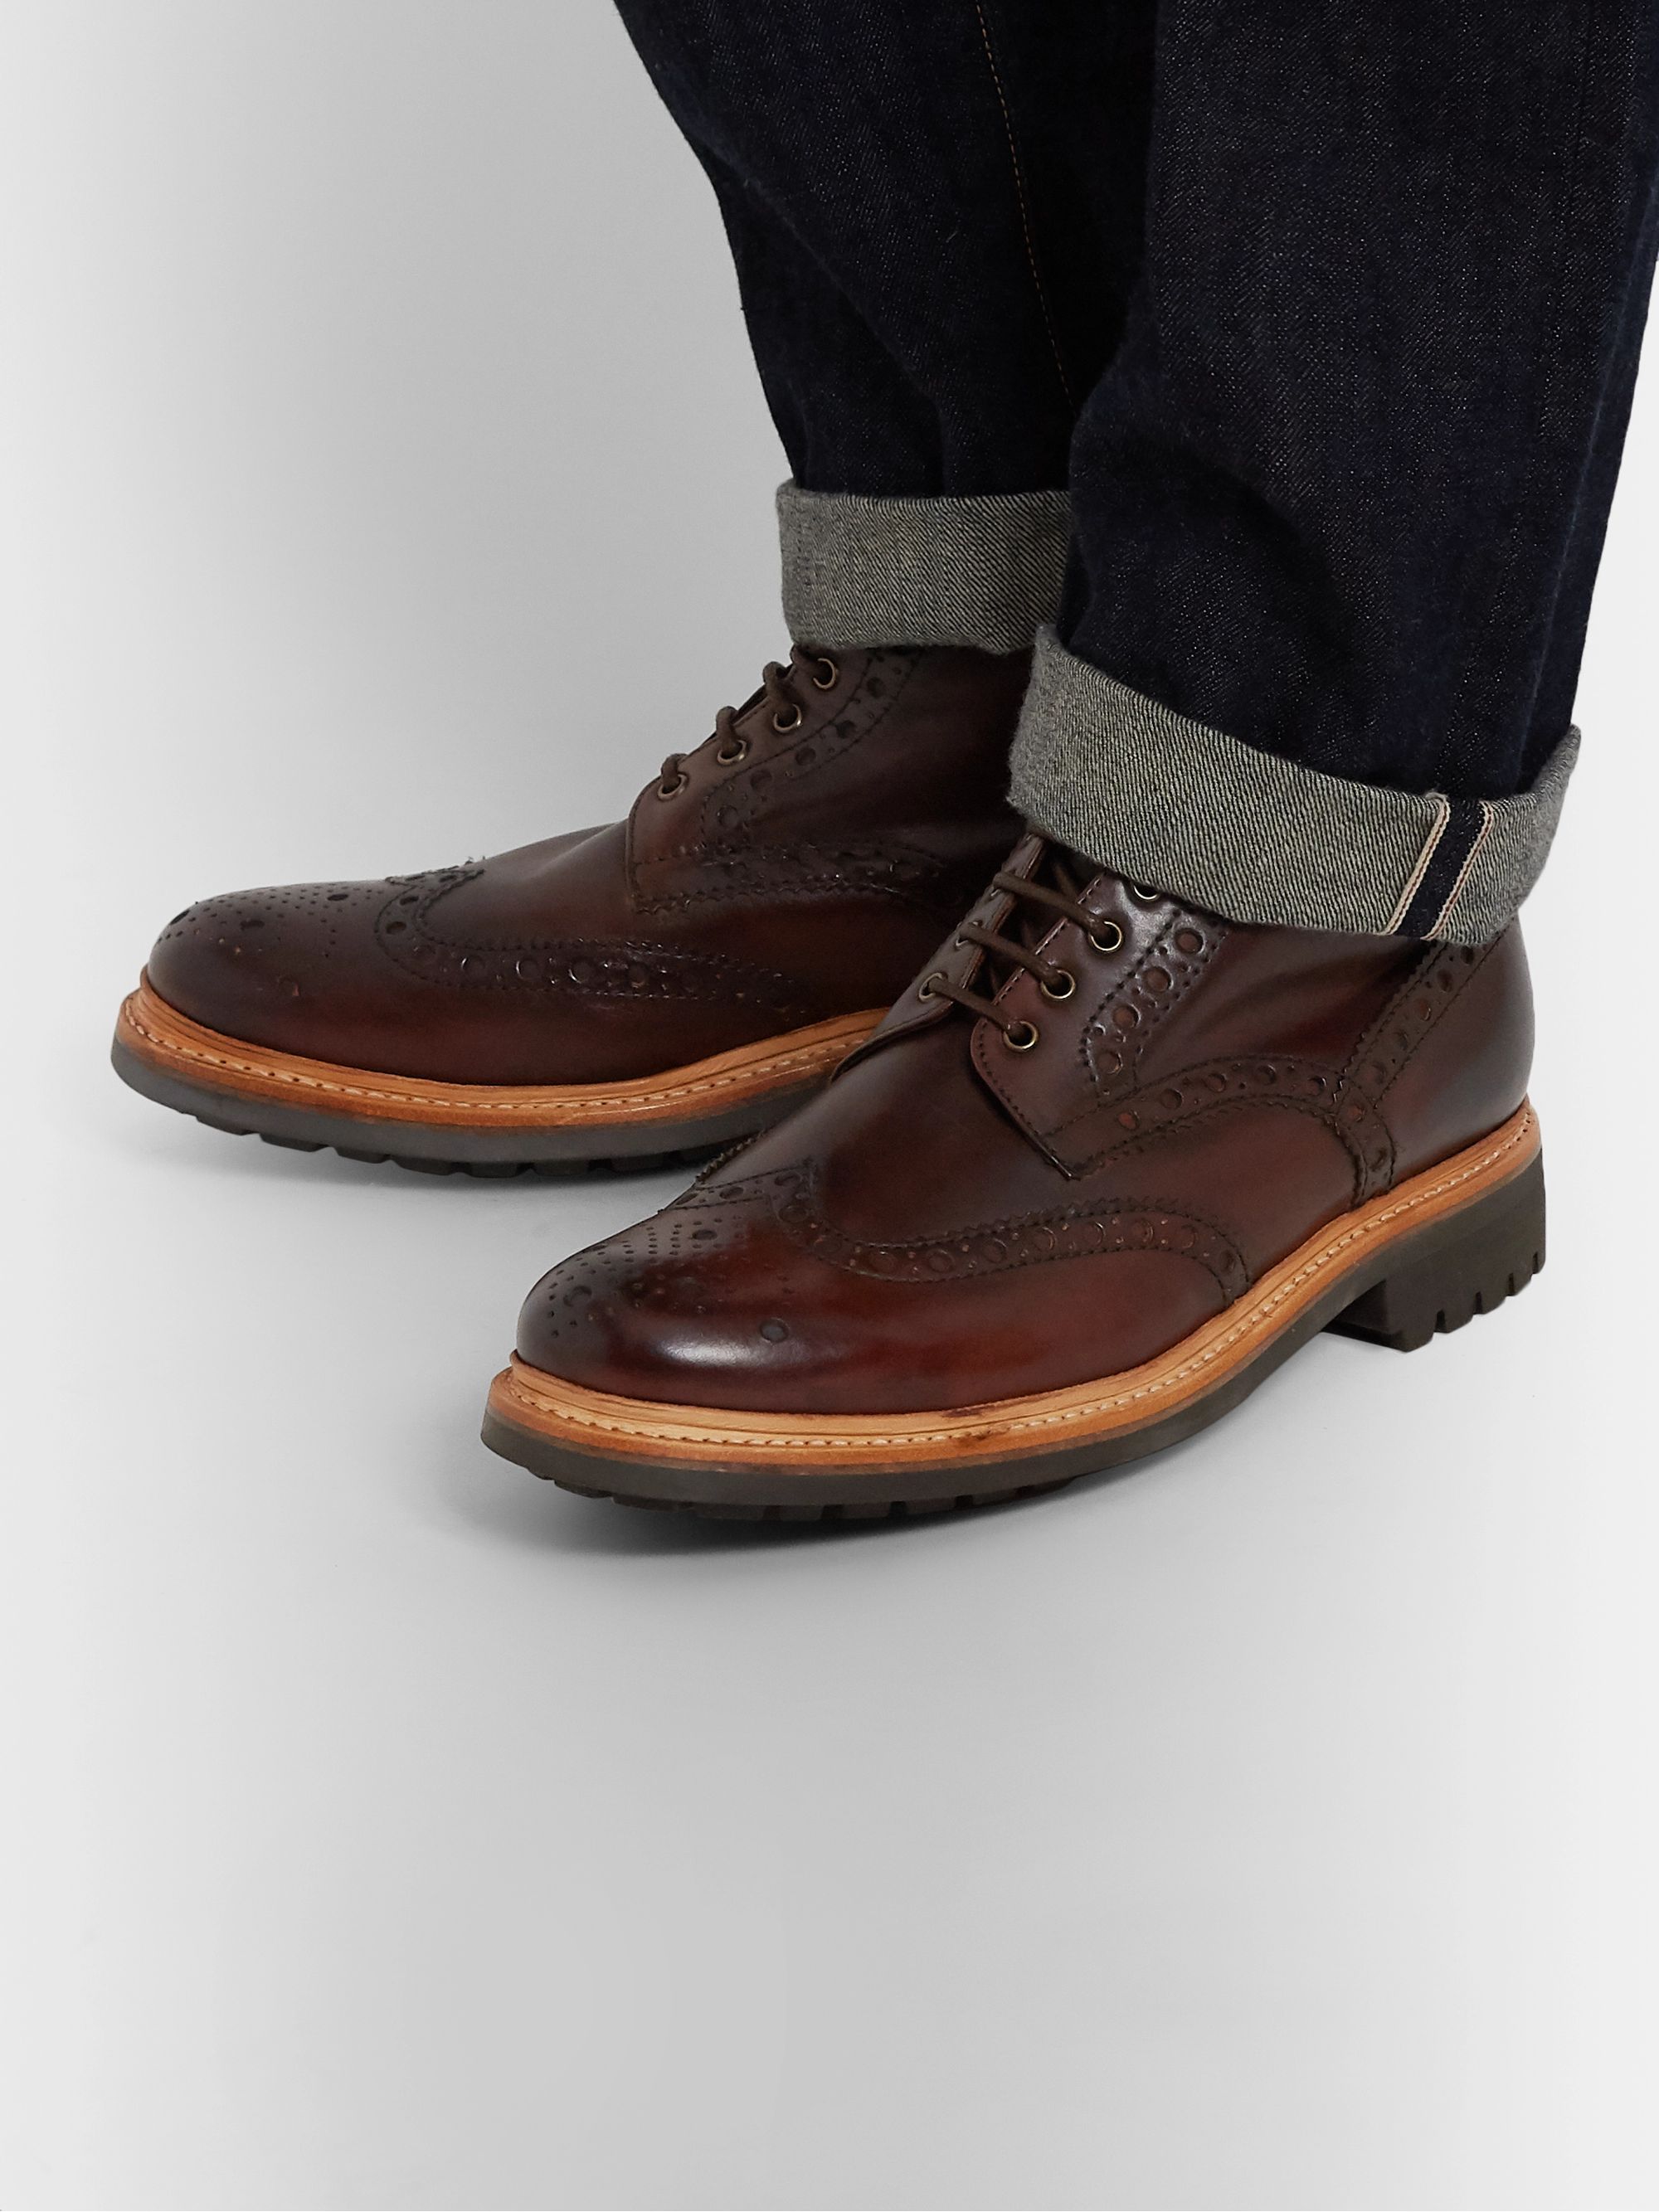 grenson boot laces